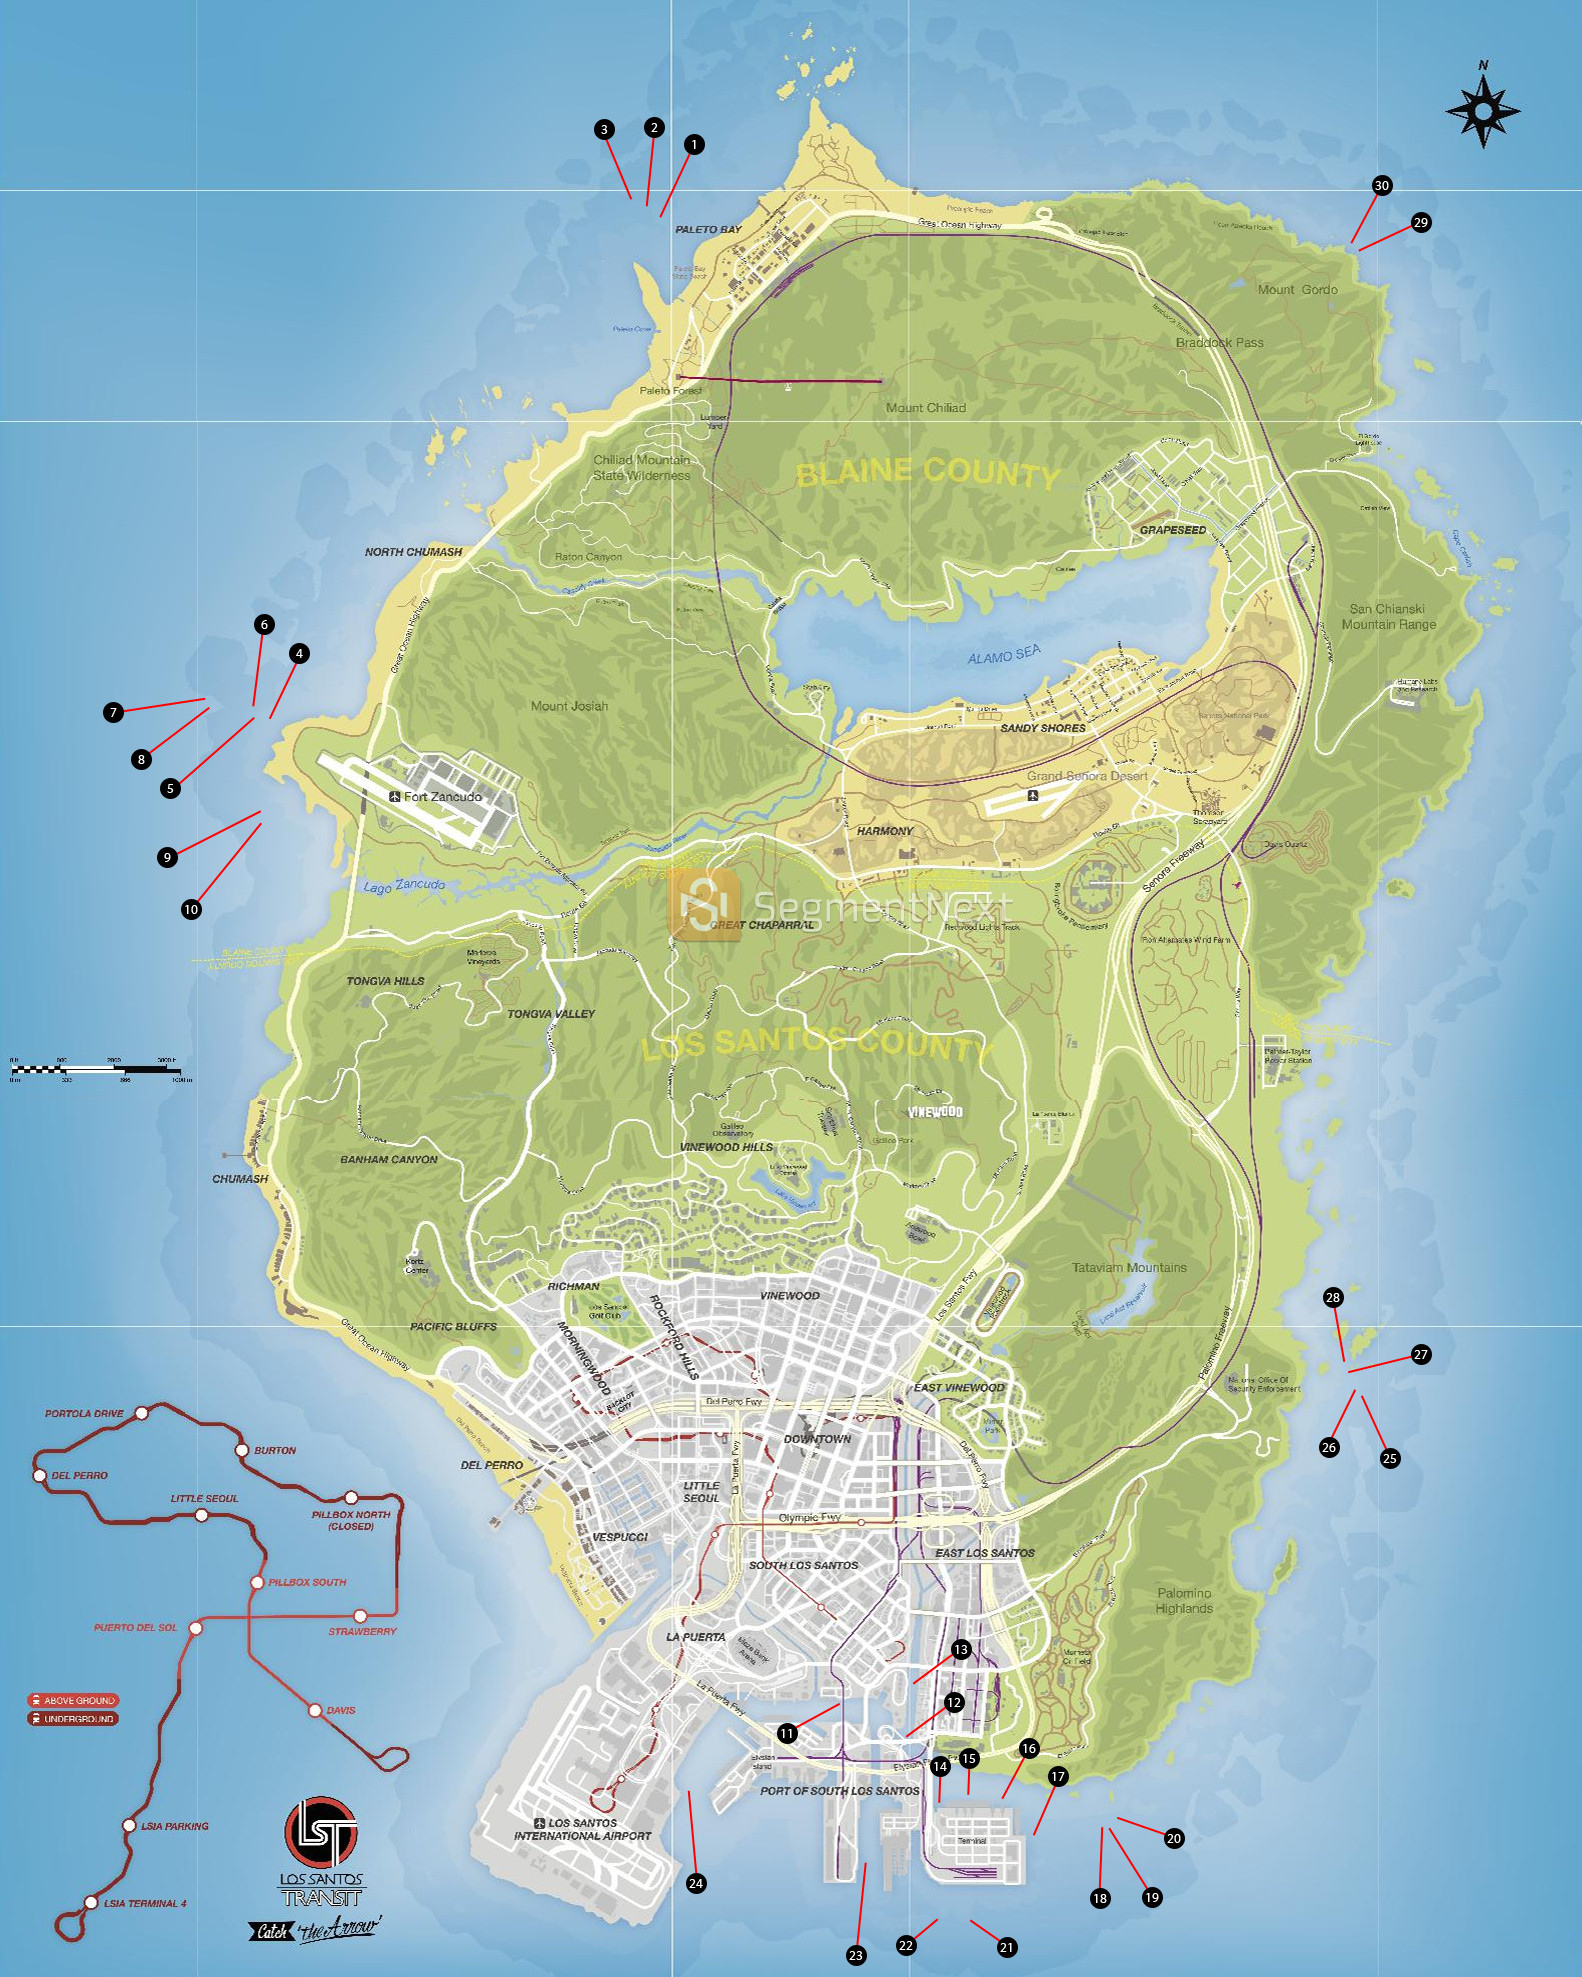 Printable Gta 5 Map Luxury Steam Munity Guide Maps And Collectibles 